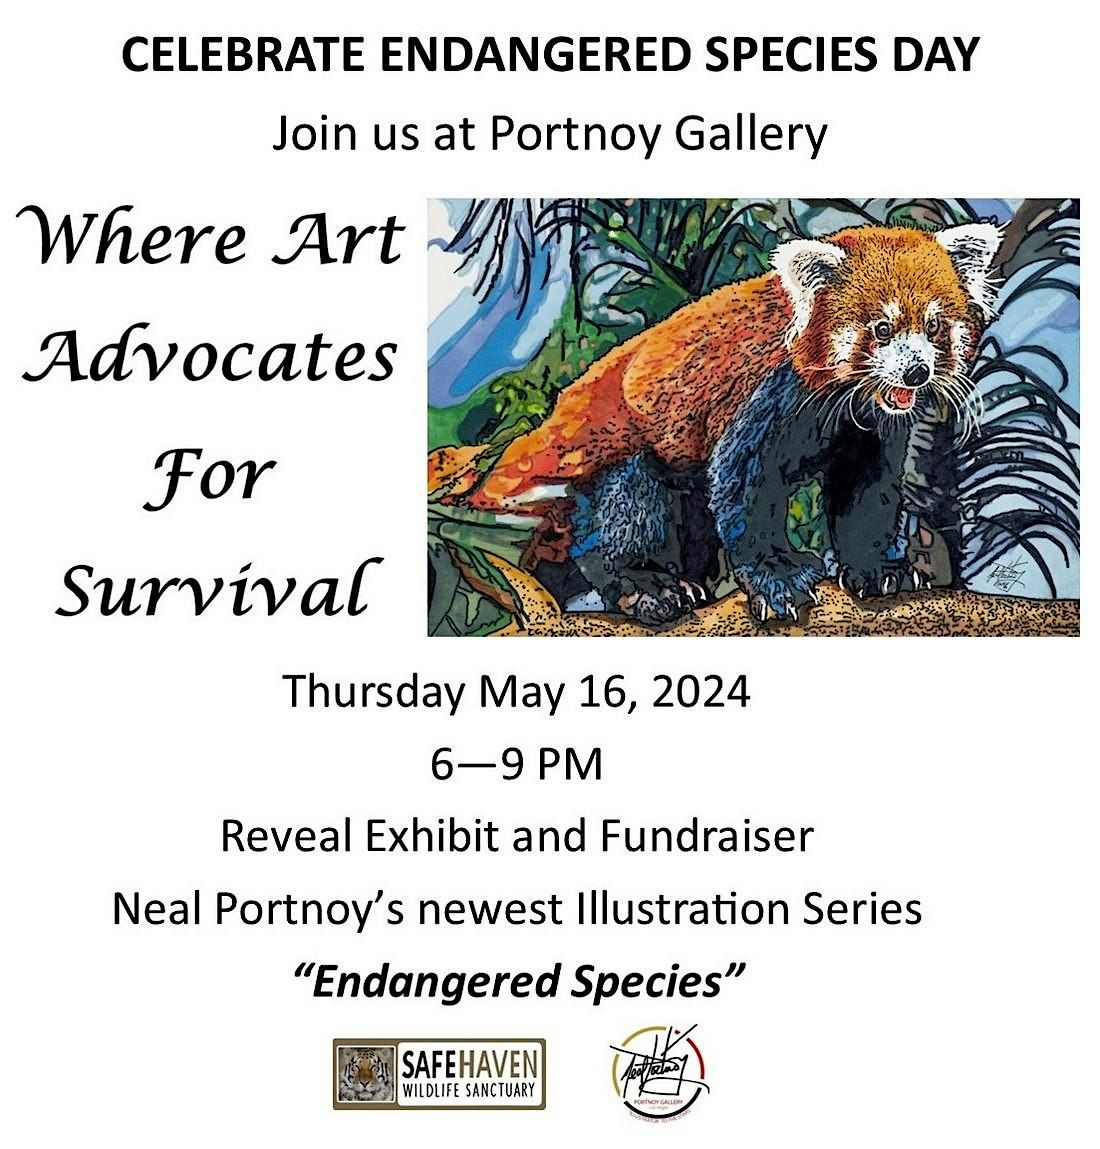 Art Reveal Exhibition and Fundraiser for Safe Haven Wildlife Sanctuary